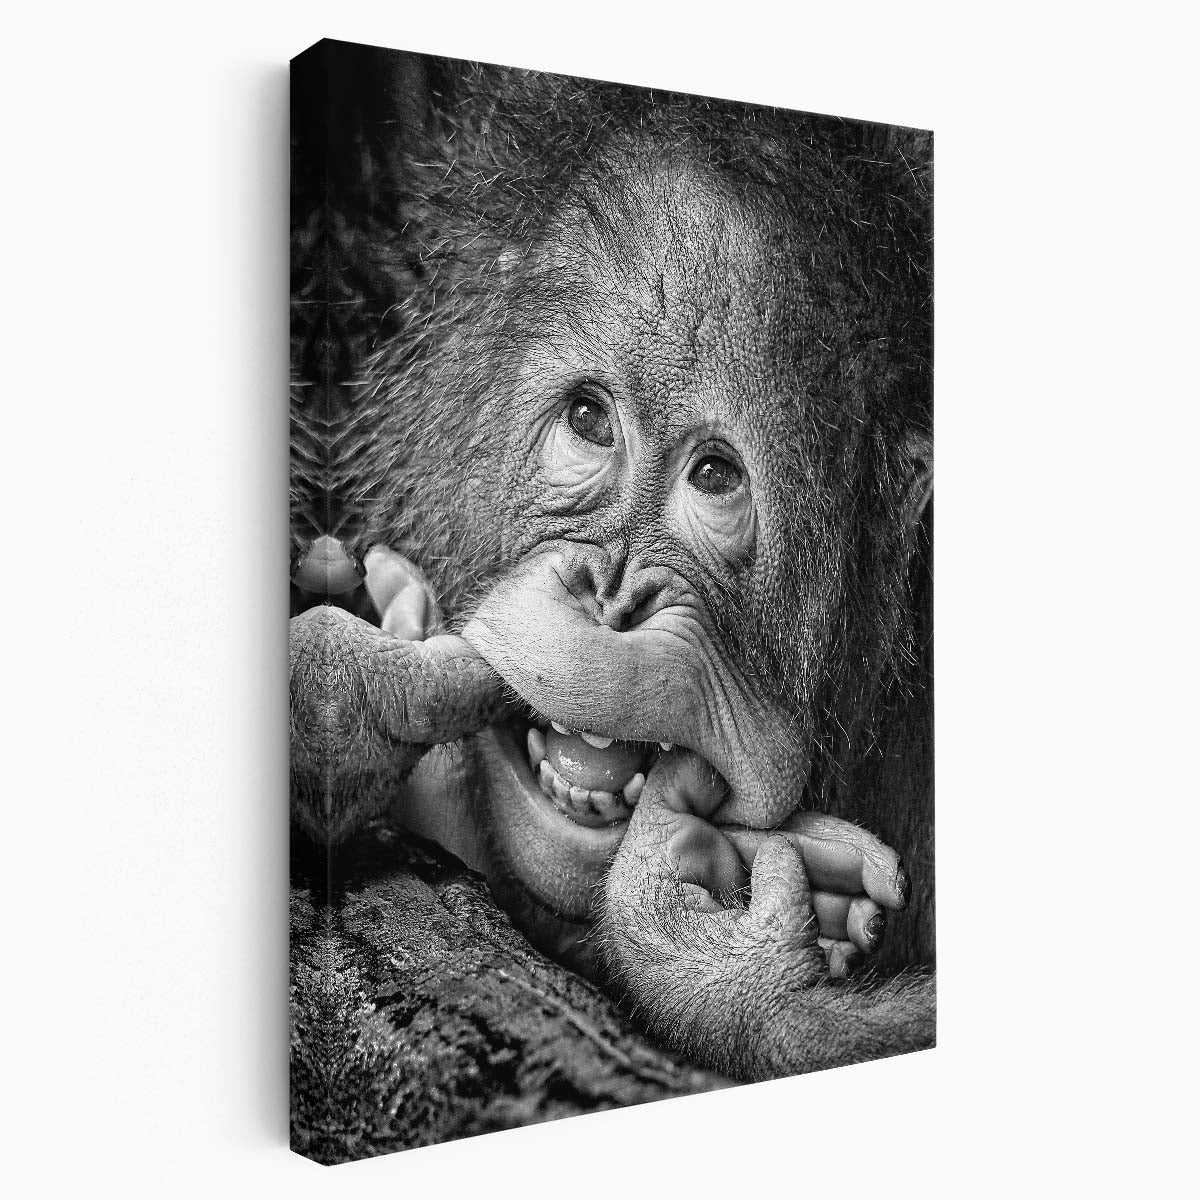 Happy Baby Orangutan Black & White Photography Wall Art by Luxuriance Designs, made in USA